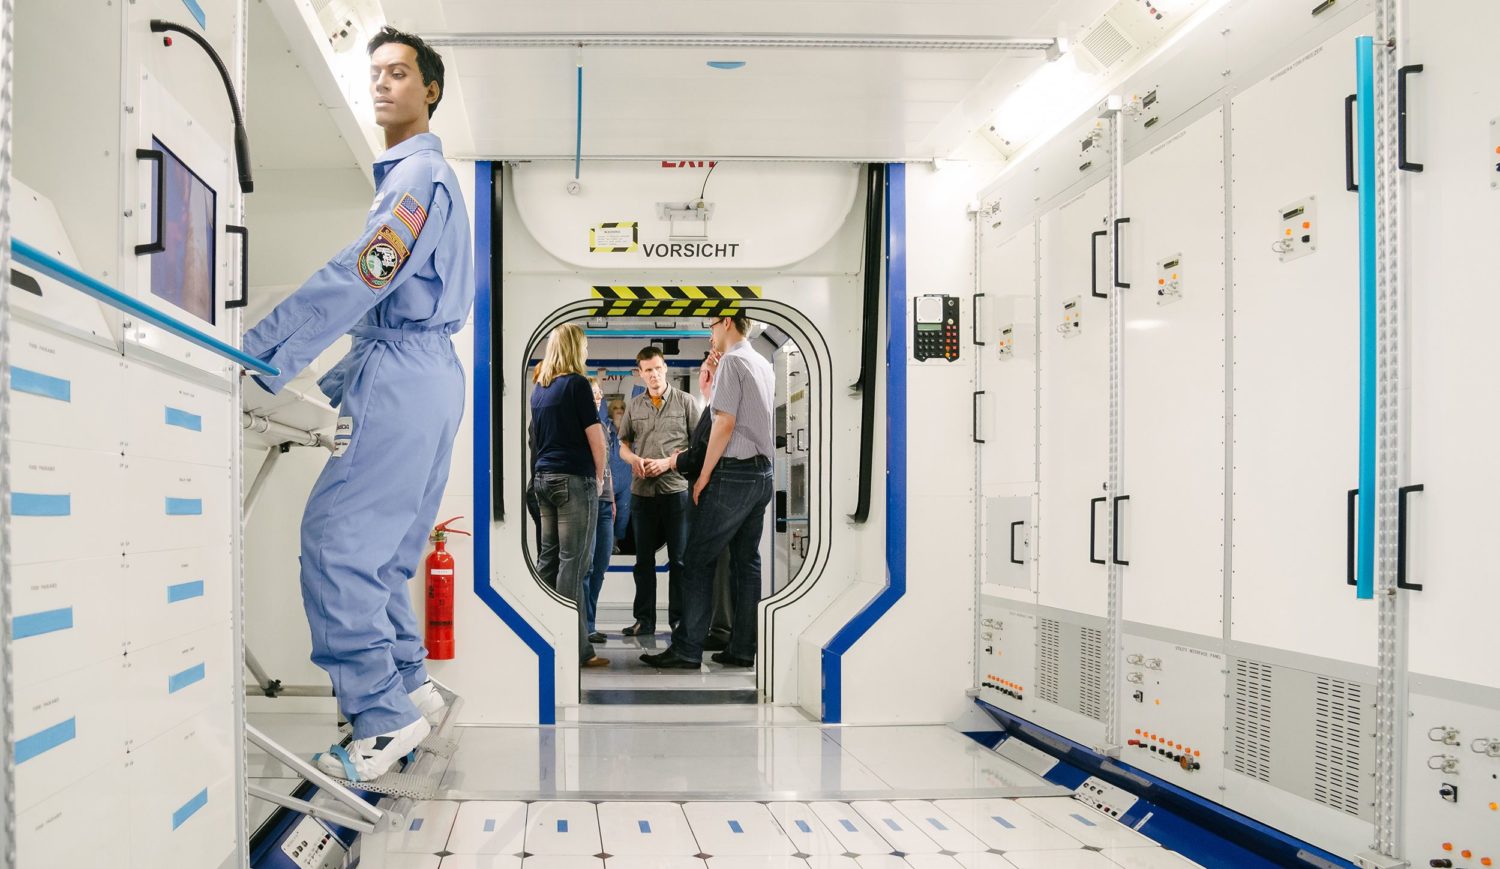 At Airbus, guests experience the 1:1 model of a space laboratory © WFB/Jonas Ginter